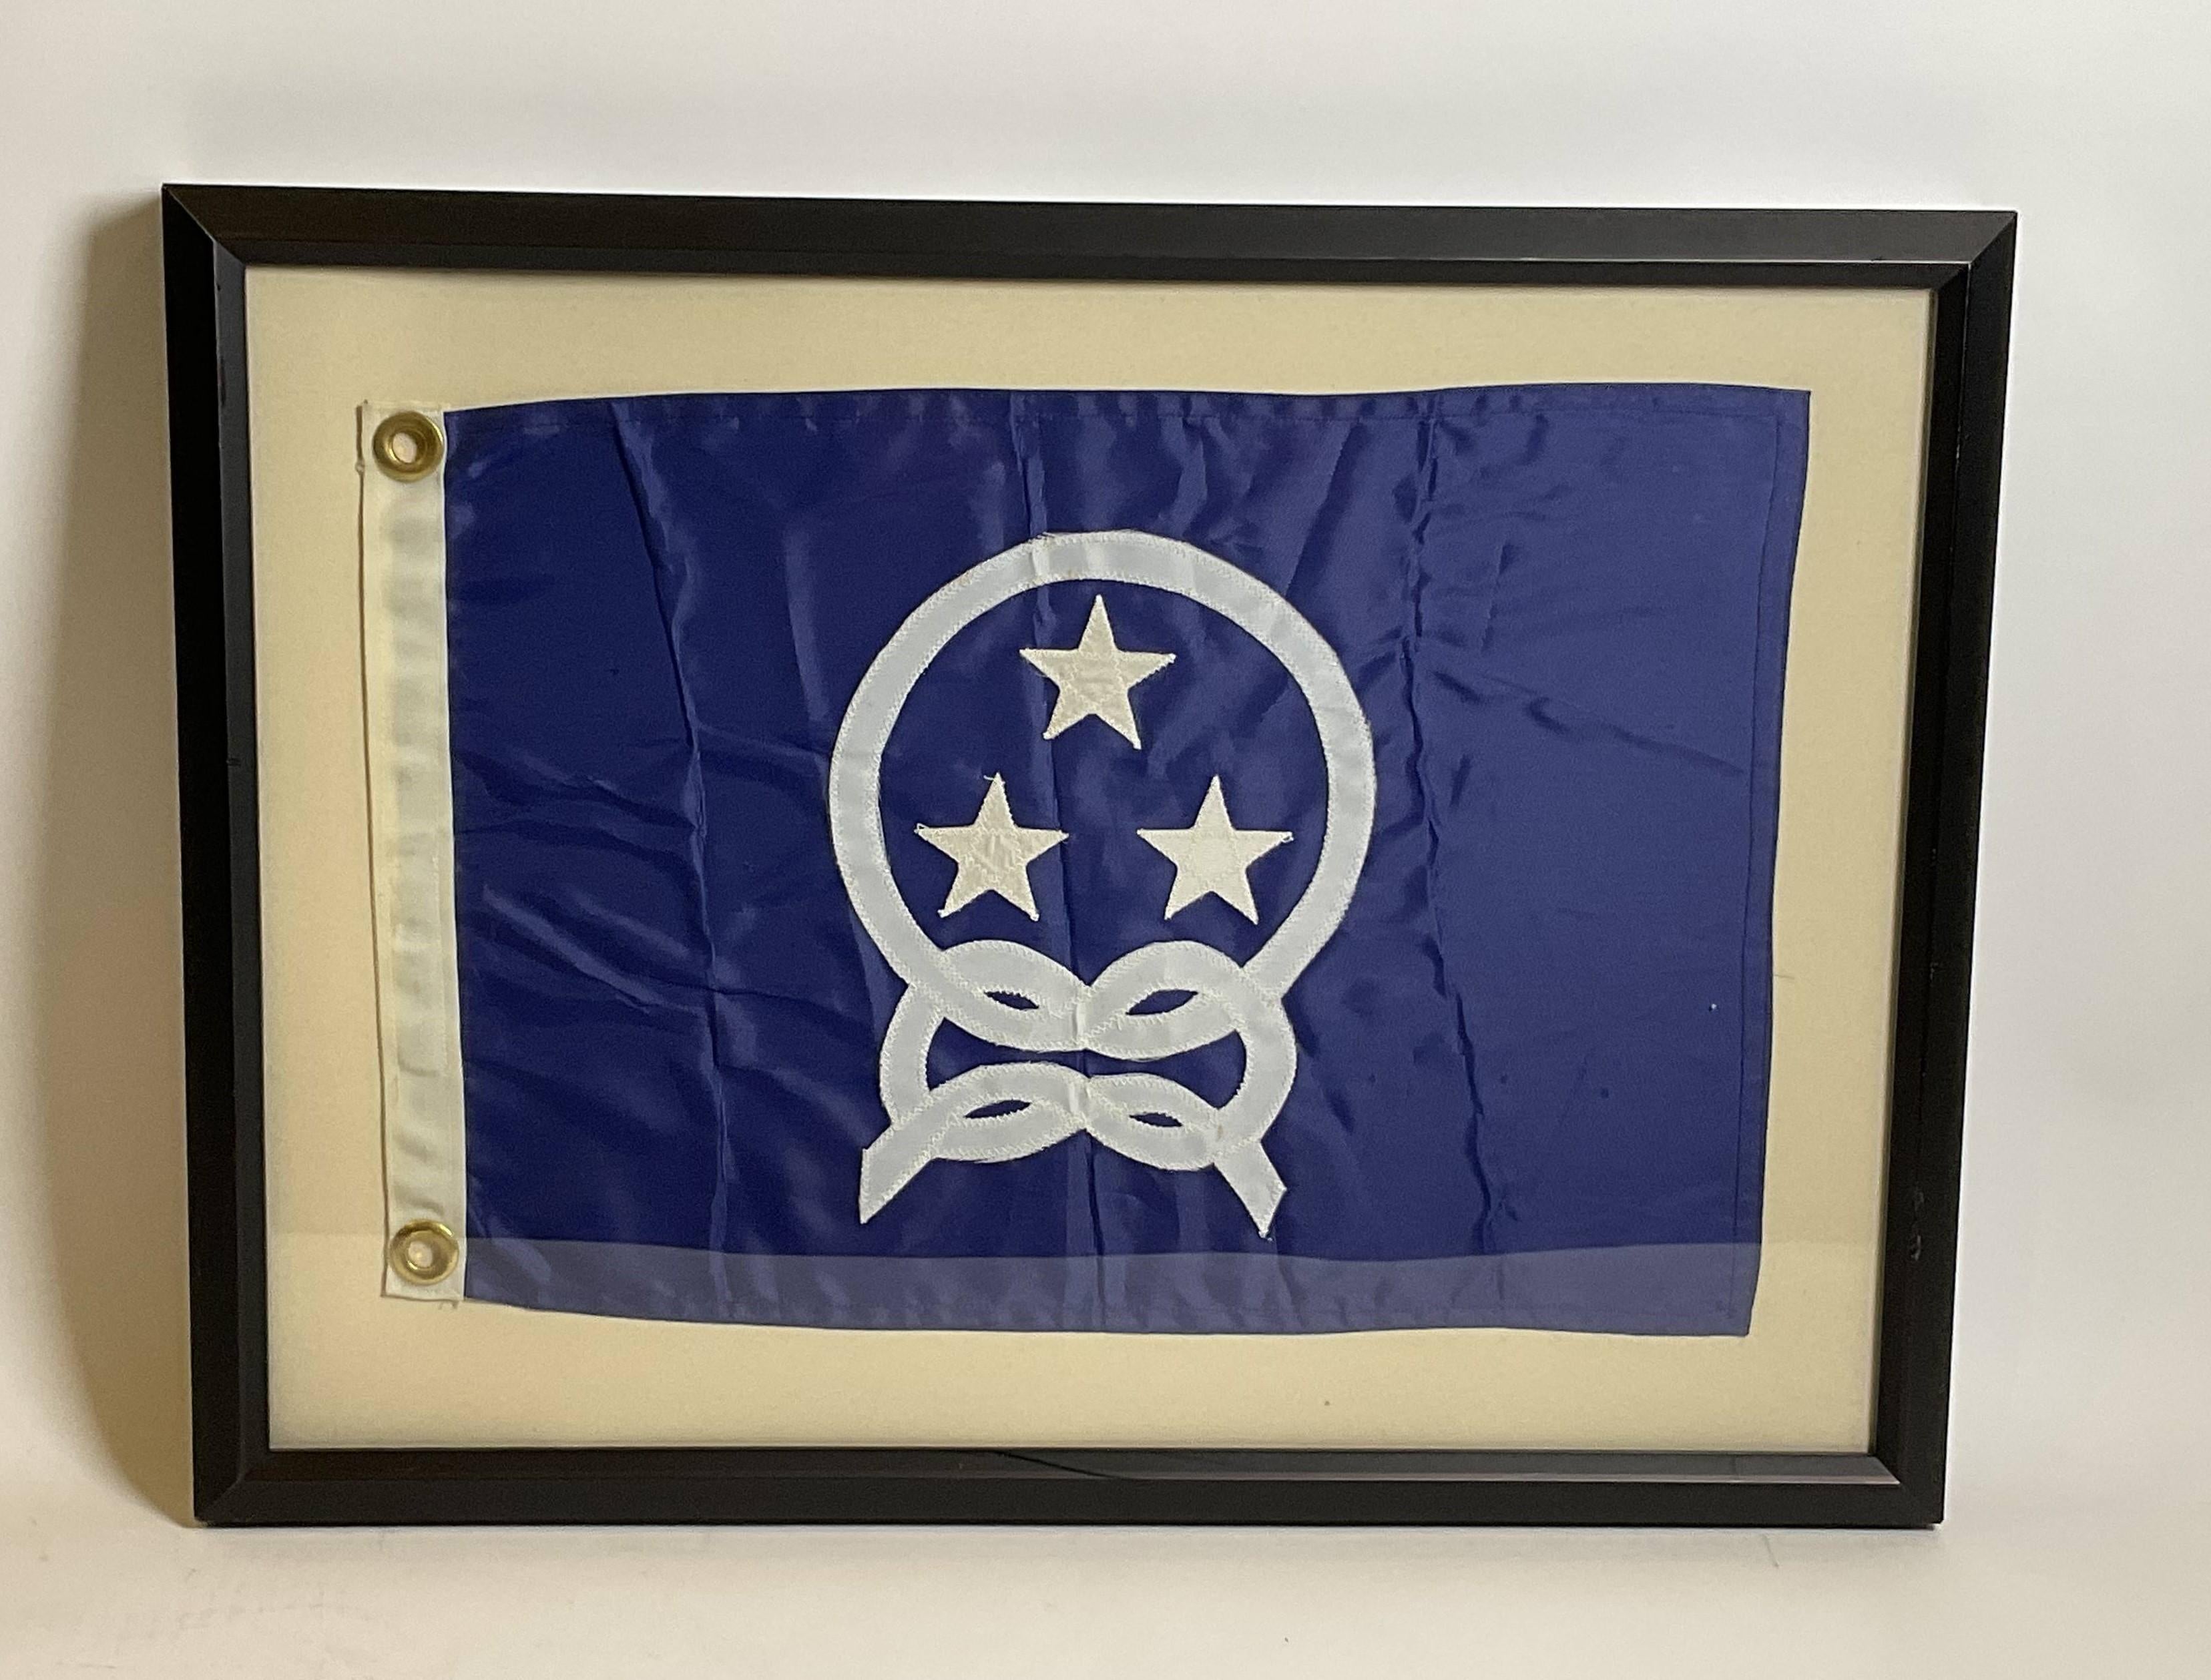 North American Yacht Club Commodores Flag For Sale